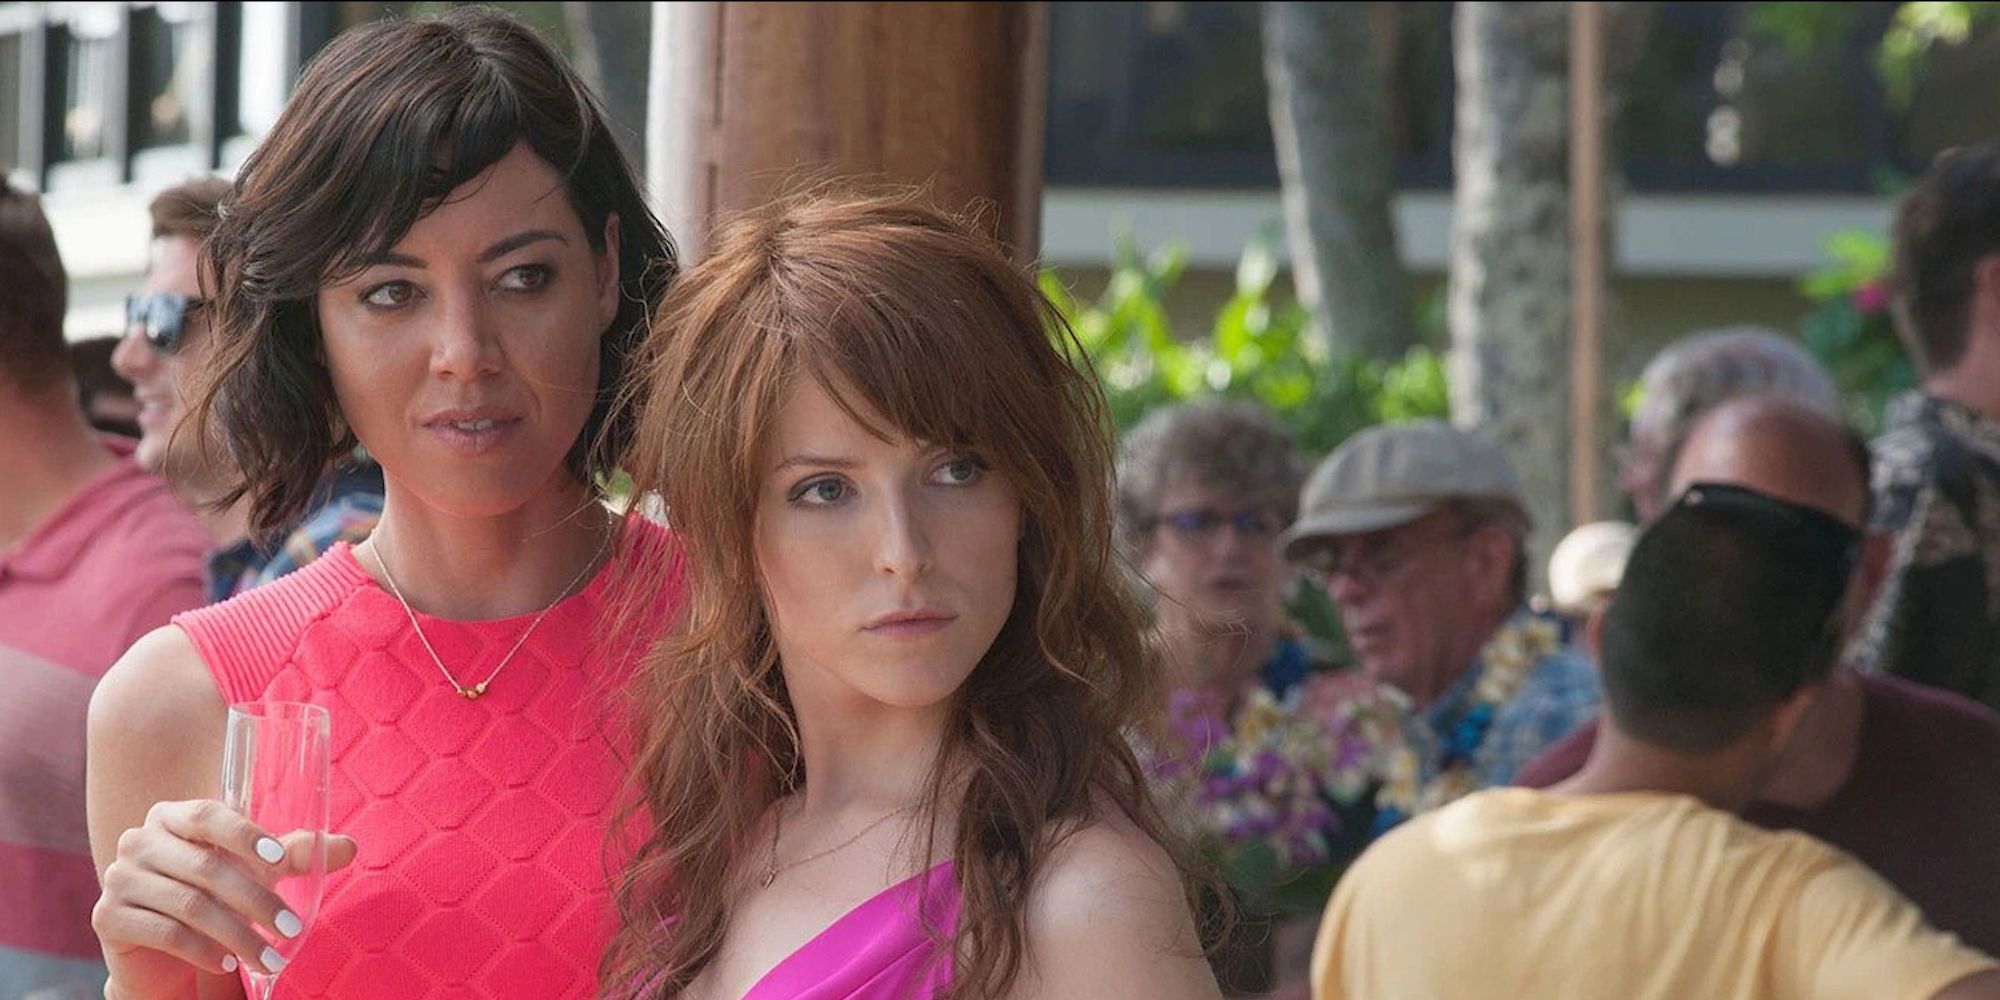 Tatiana and Alice looking in the same direction in Mike And Dave Need Wedding Dates.